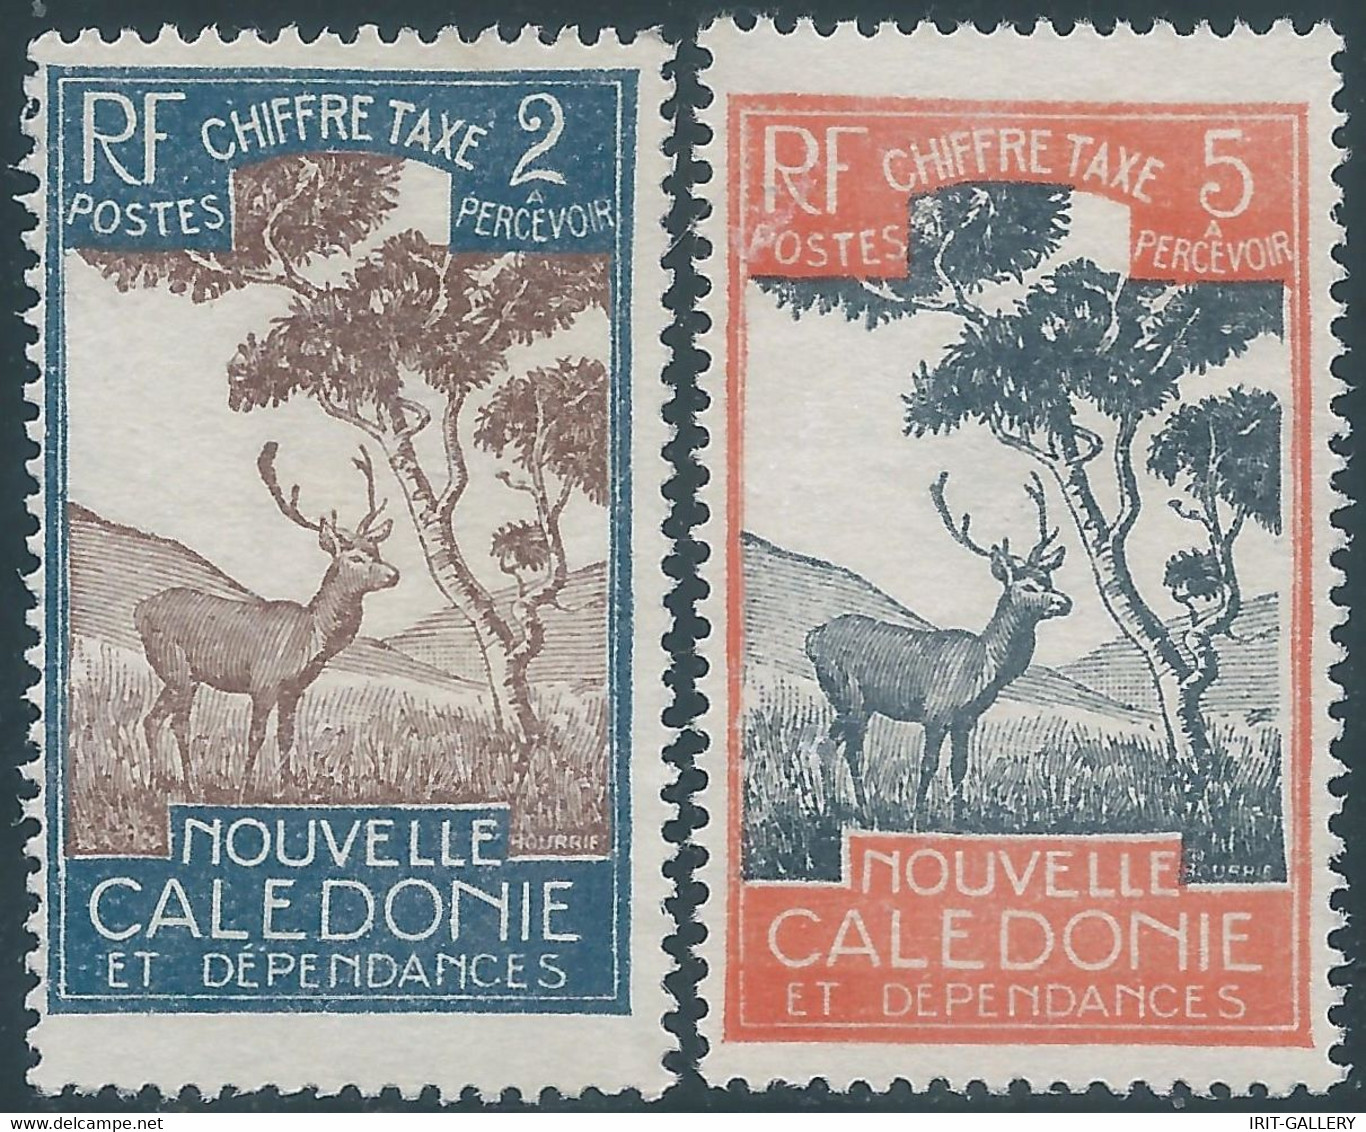 FRANCE,Calédonie - New Caledonia,1920 CHIFFER TAXE,Revenue Stamps Fiscal Tax,2 & 5F,Mint - Impuestos